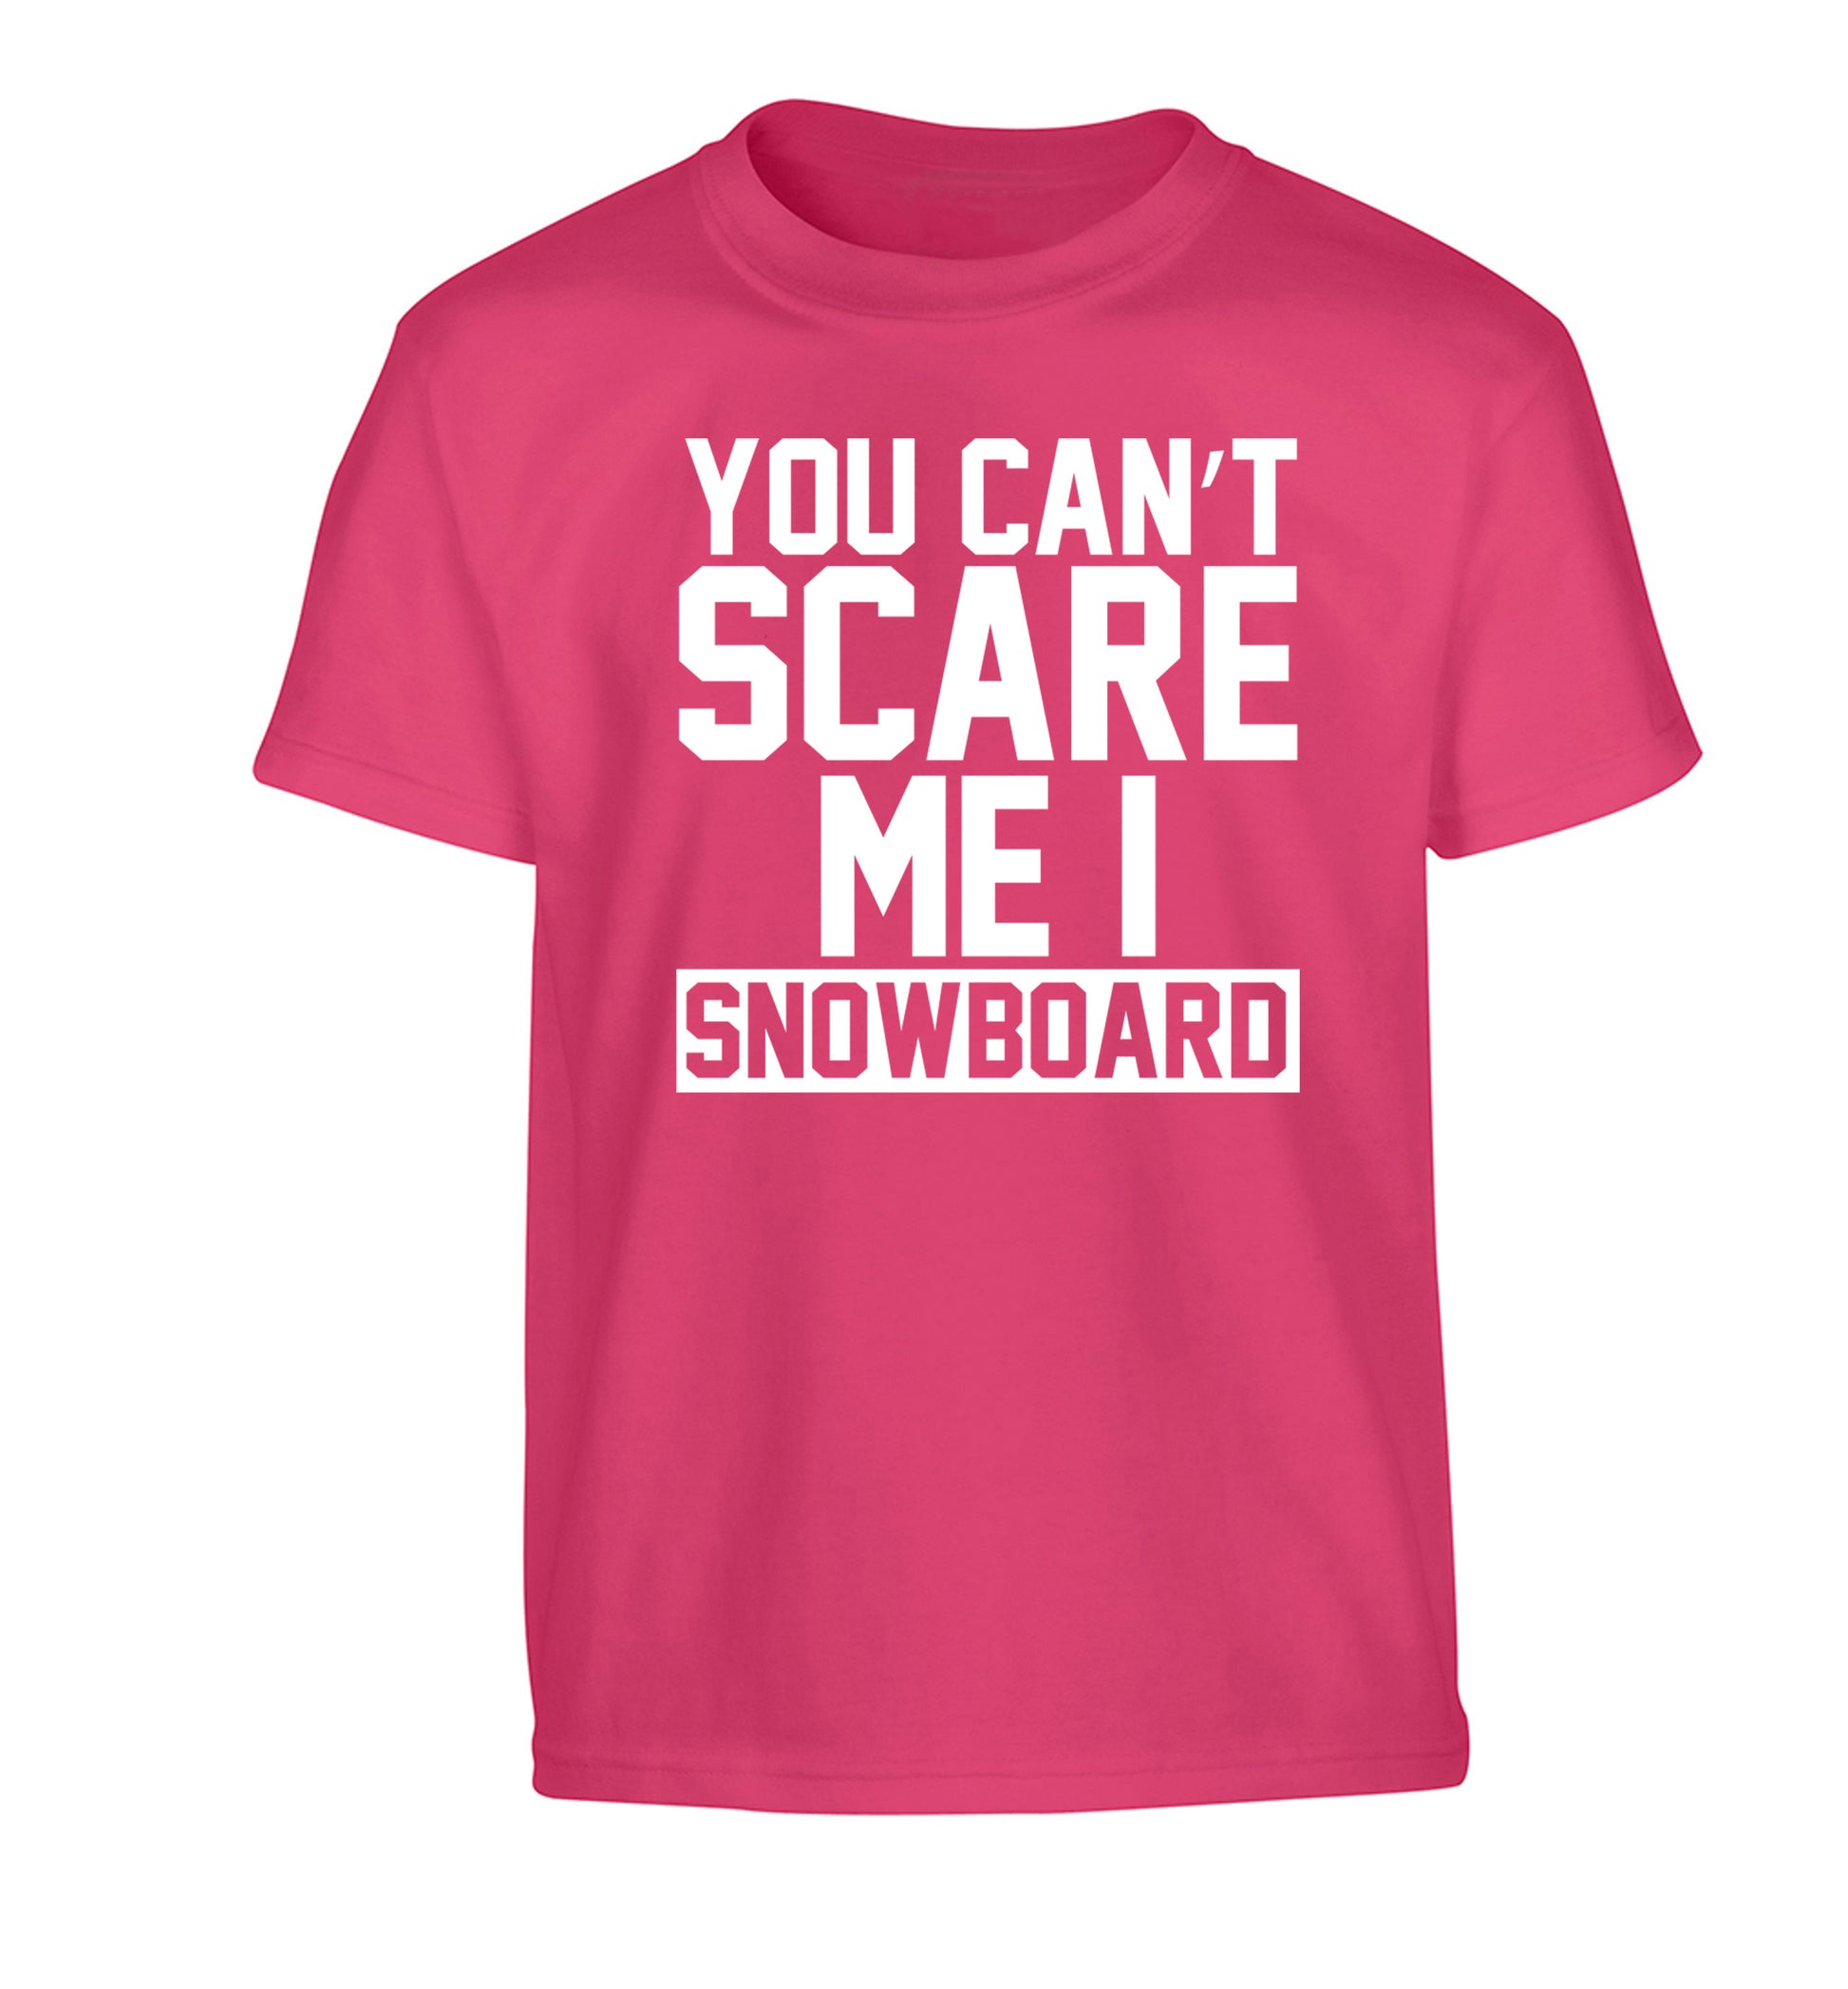 You can't scare me I snowboard Children's pink Tshirt 12-14 Years